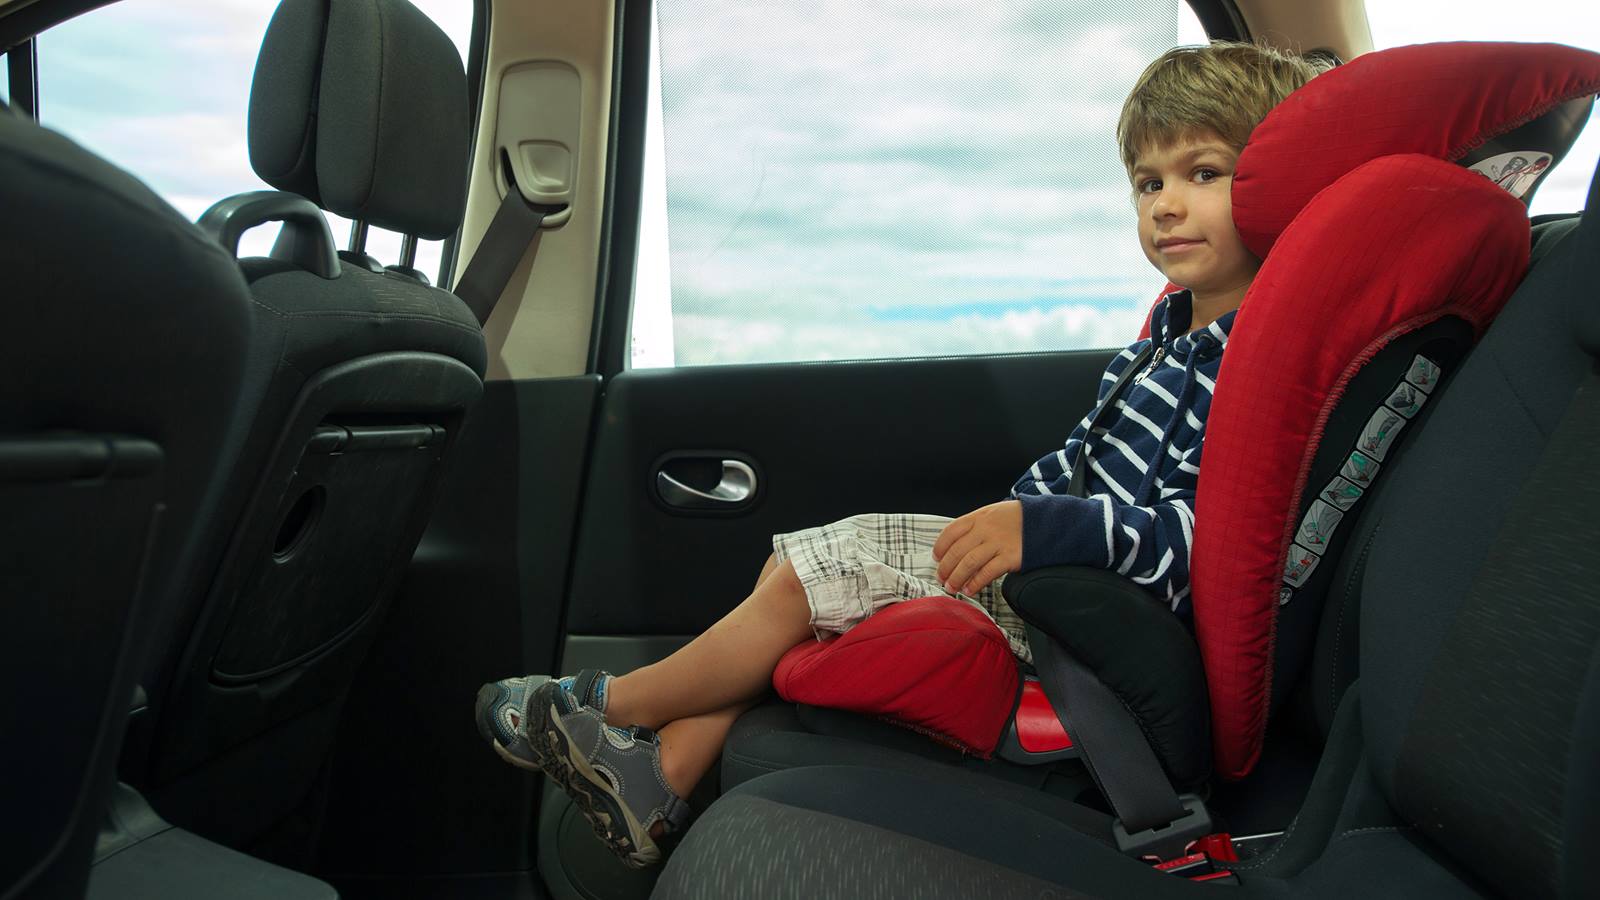 Child Ready To Move Into A Booster Seat, What Age Can My Child Just Have A Booster Seat